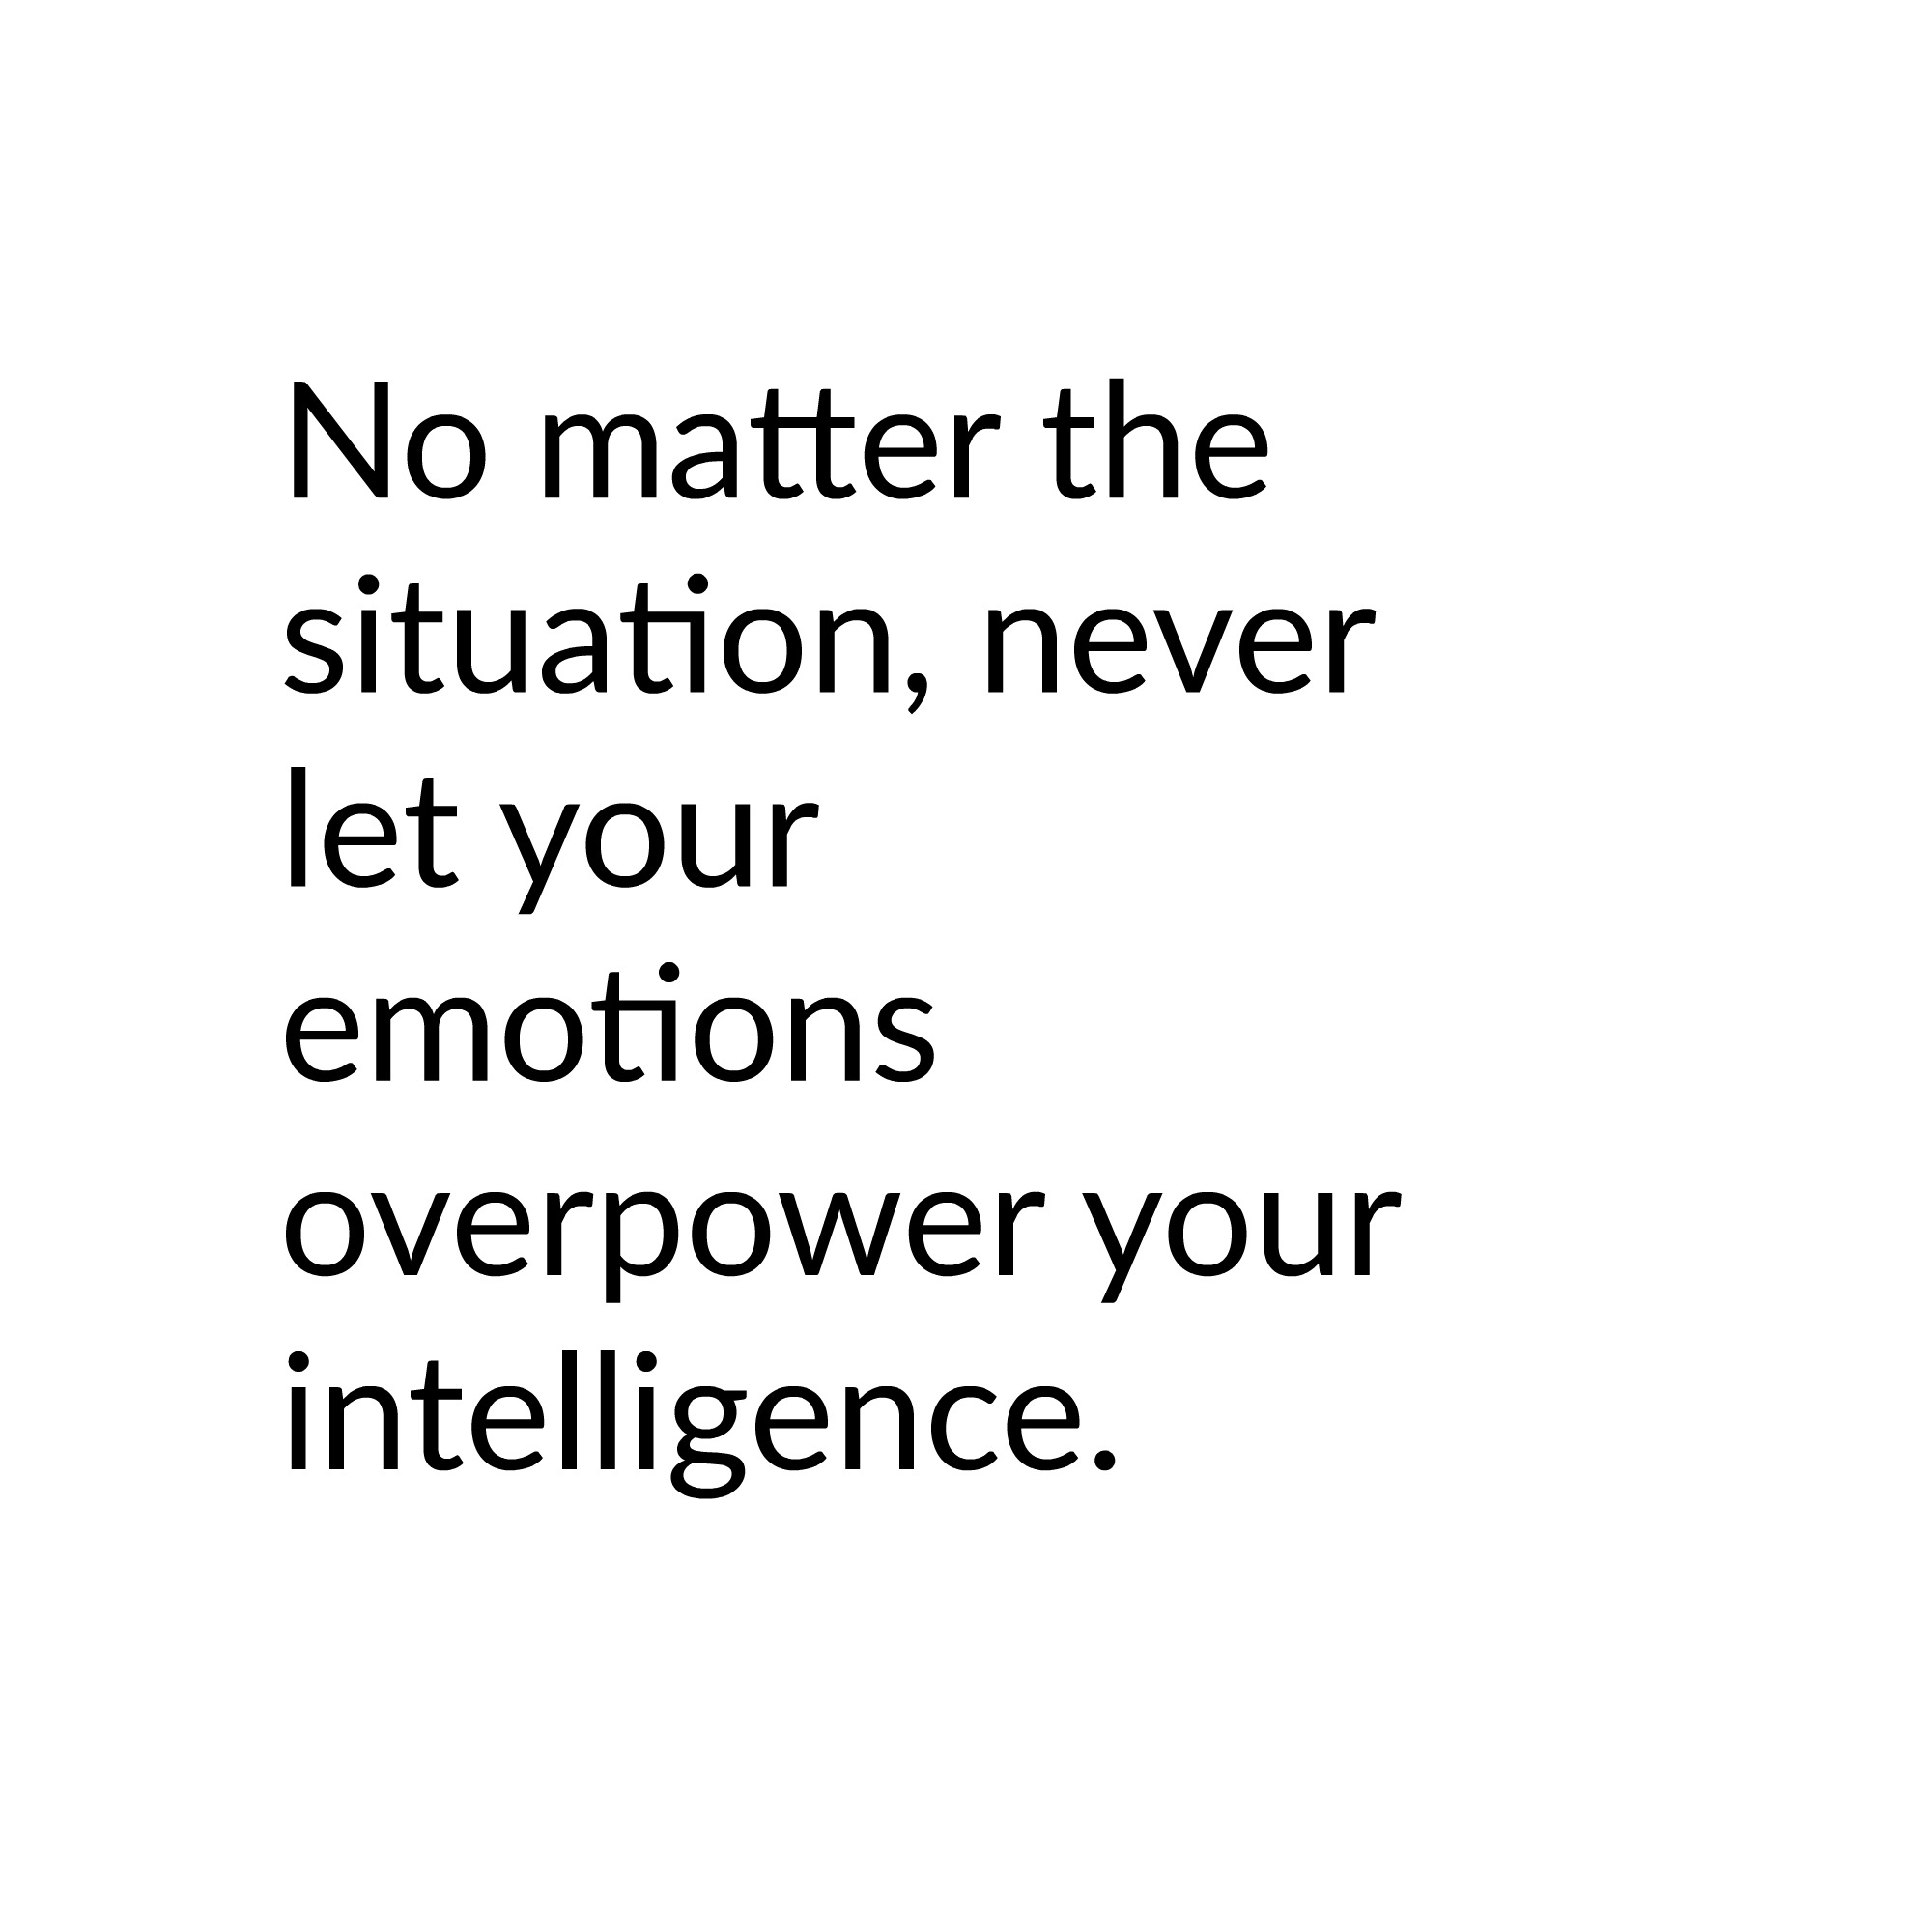 You're in control. Read more on Ways to Increase Emotional Intelligence on www.roliedema.com